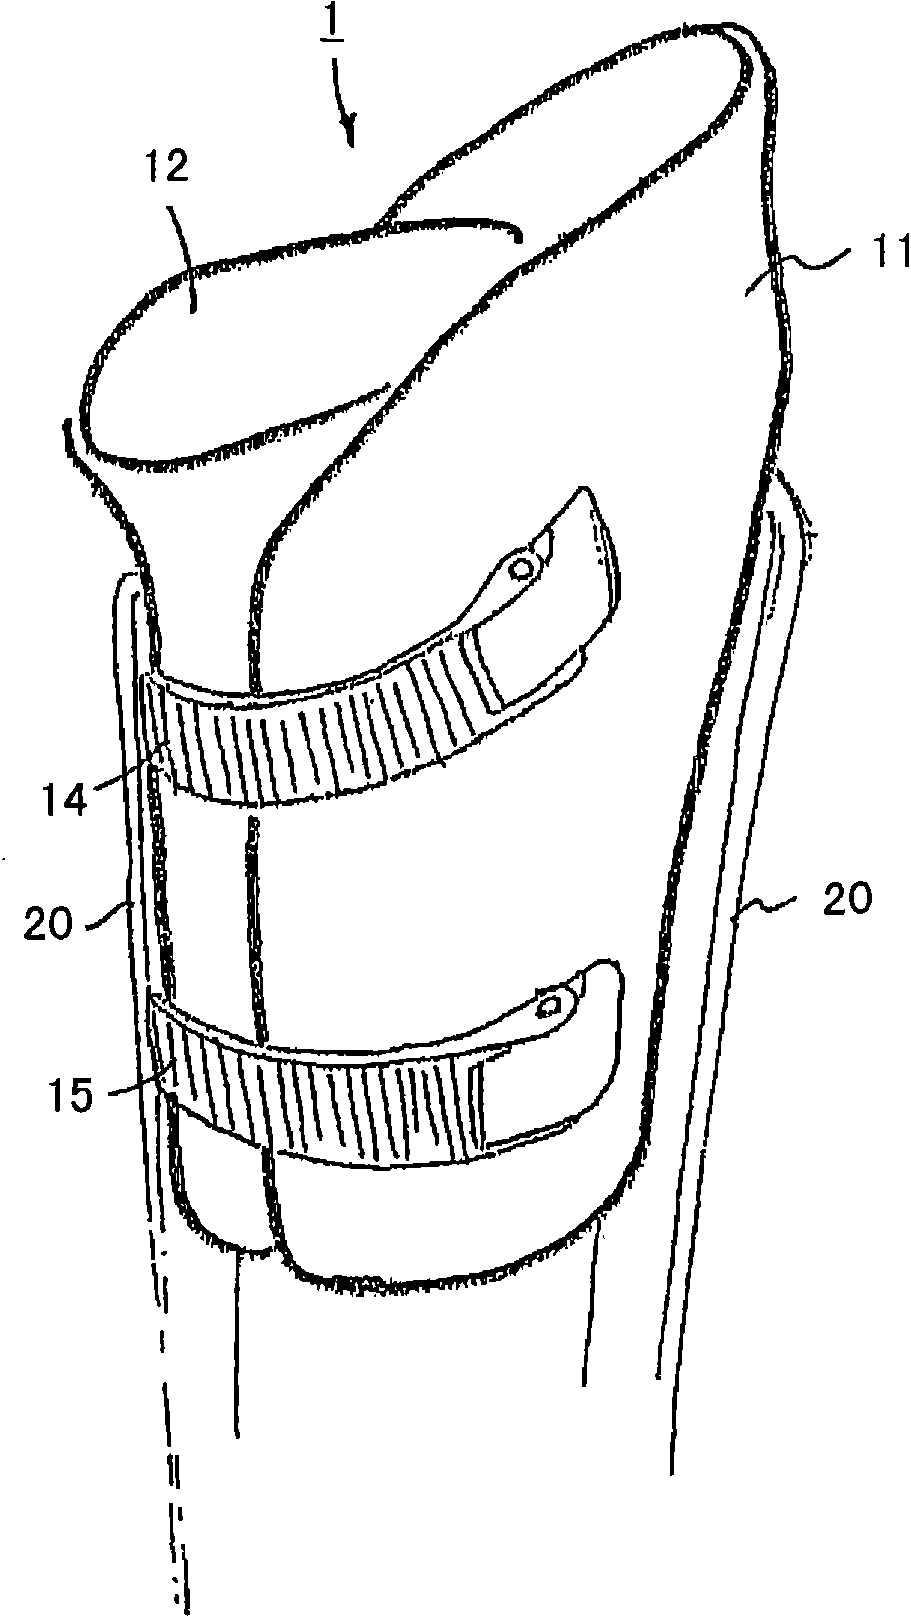 Prosthesis shaft and system comprising a prosthesis shaft and prosthesis device